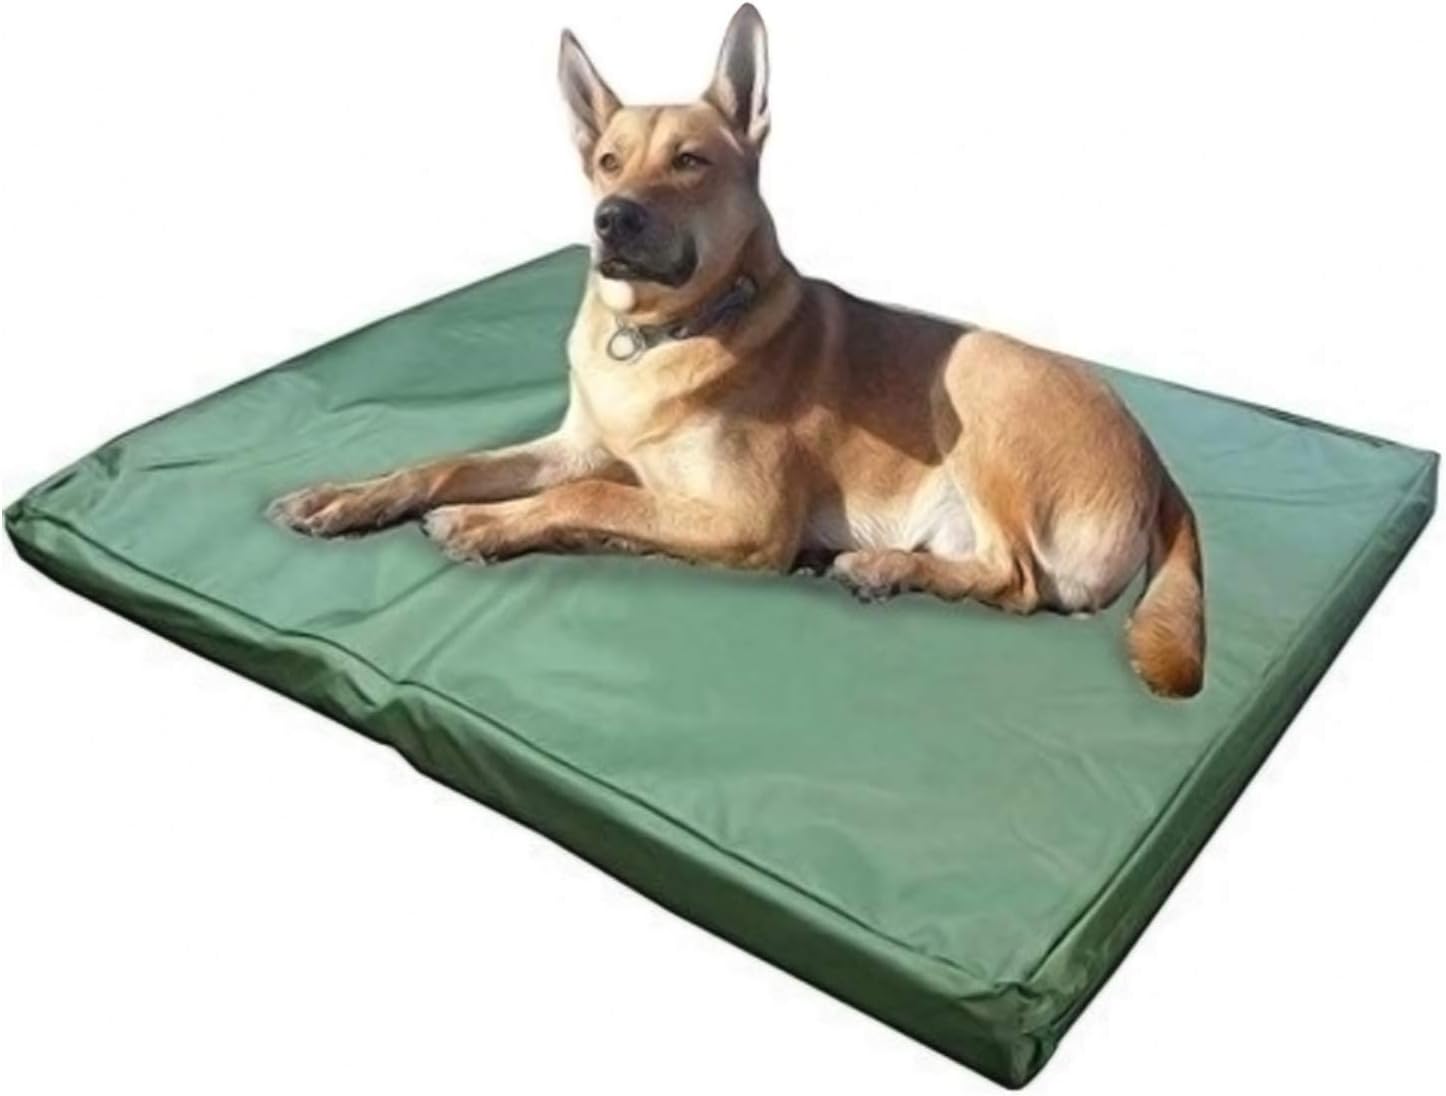 ADOV DOG Bed Medium, Waterproof Pet Bed, Premium Double-Sided and Washable Cover, Orthopaedic Foam Dog Bed Mat, Medium Kennel Pads for Dogs, Cats, Other Small and Large Sized Pets - (84 x 54cm)